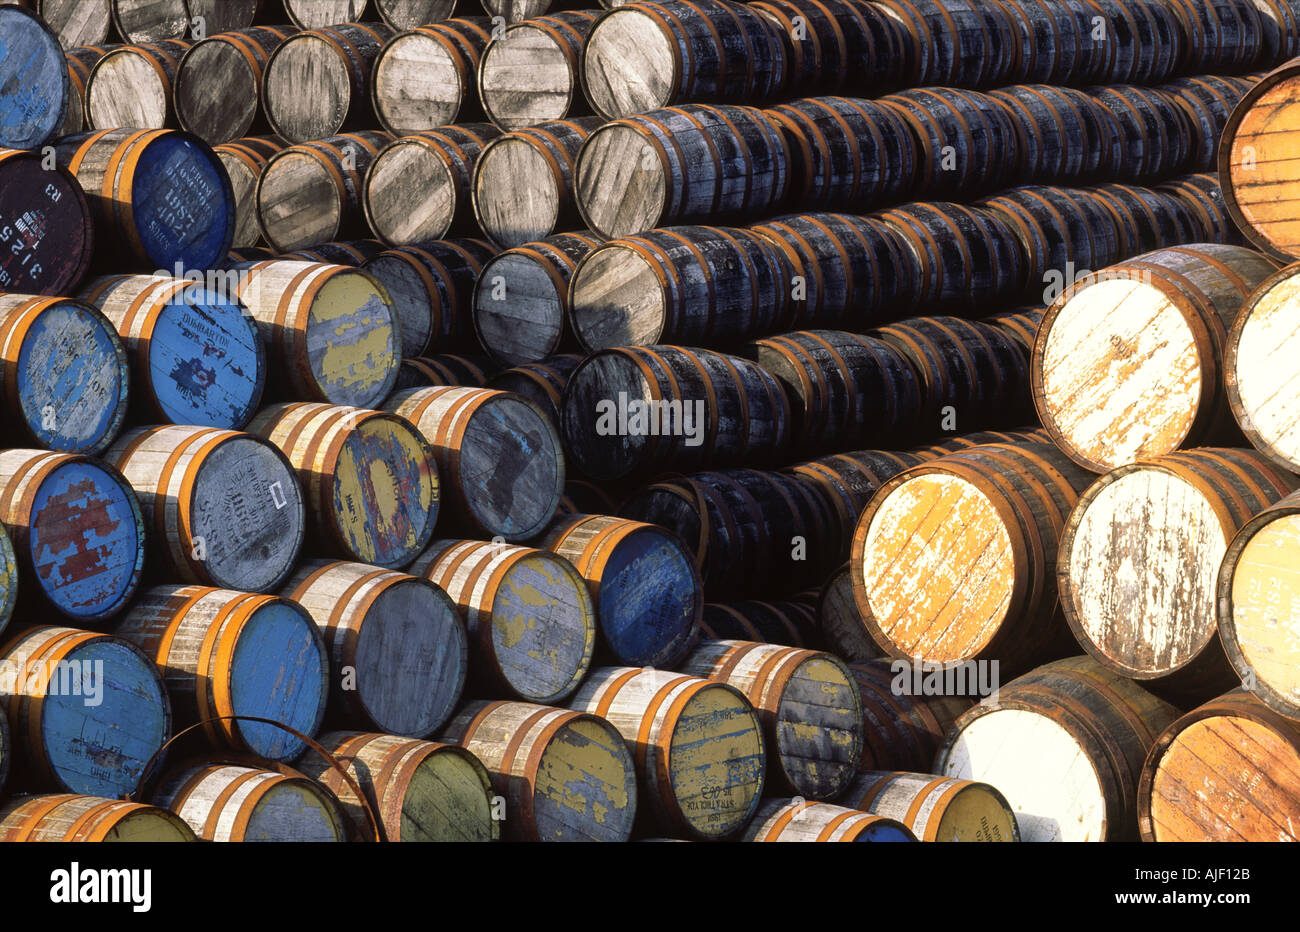 Stored whisky barrels in town of Dufftown, Scotlands whisky capital. Strathspey, Speyside, Grampian region of Scotland Stock Photo